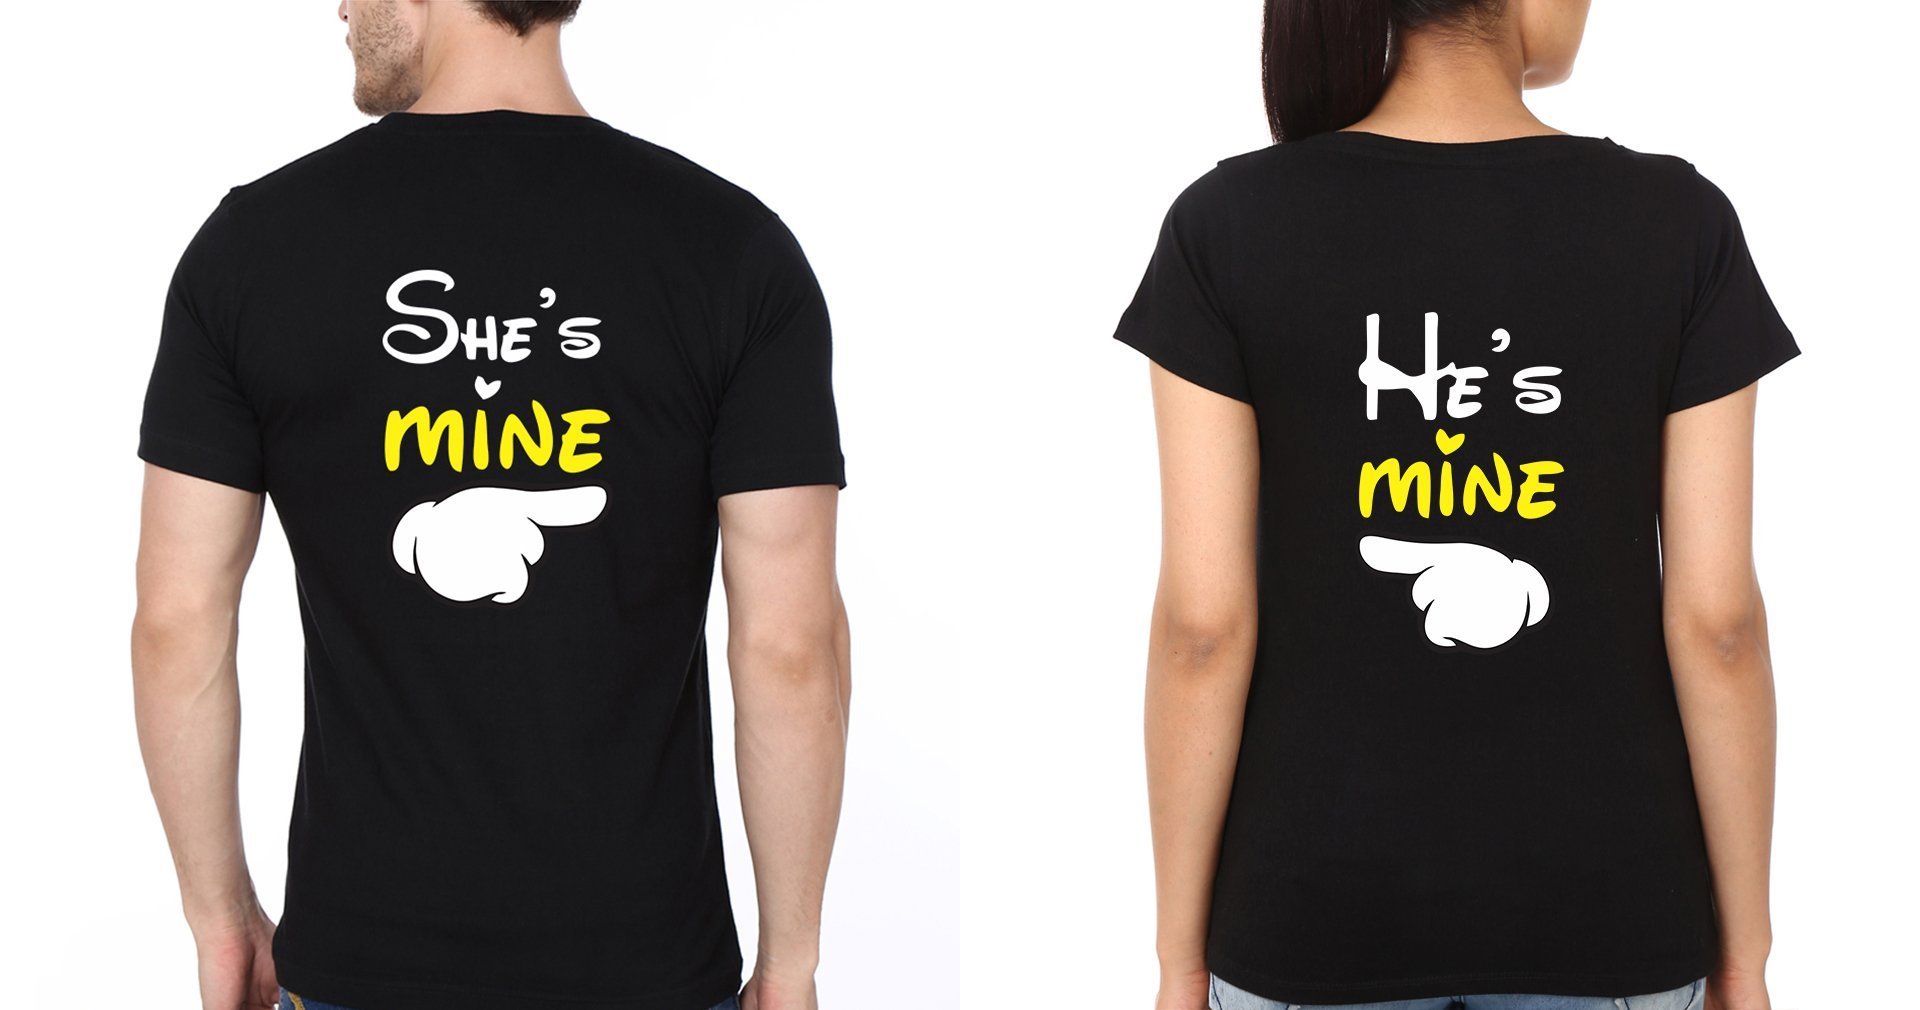 He is Mine and She is Mine Couple Half Sleeves T-Shirts -FunkyTradition - FunkyTradition